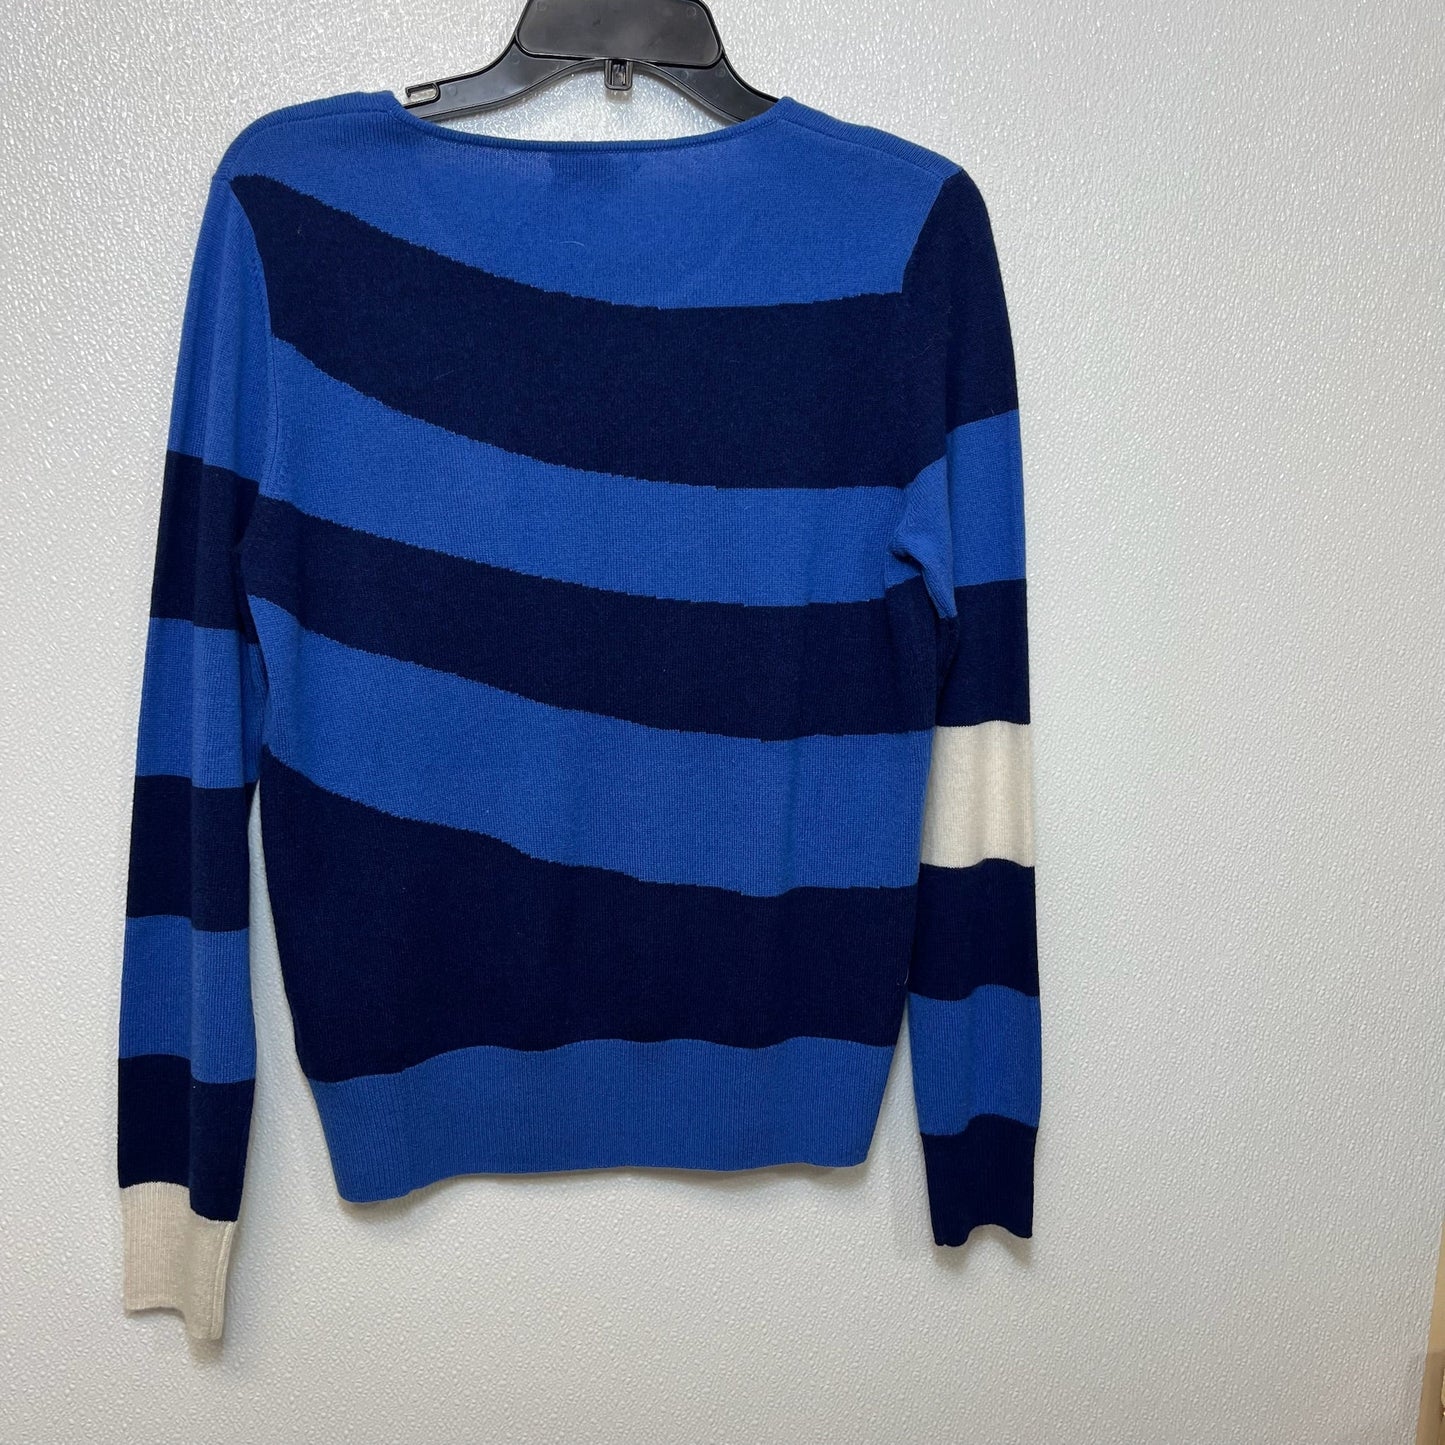 Sweater By Cme  Size: L